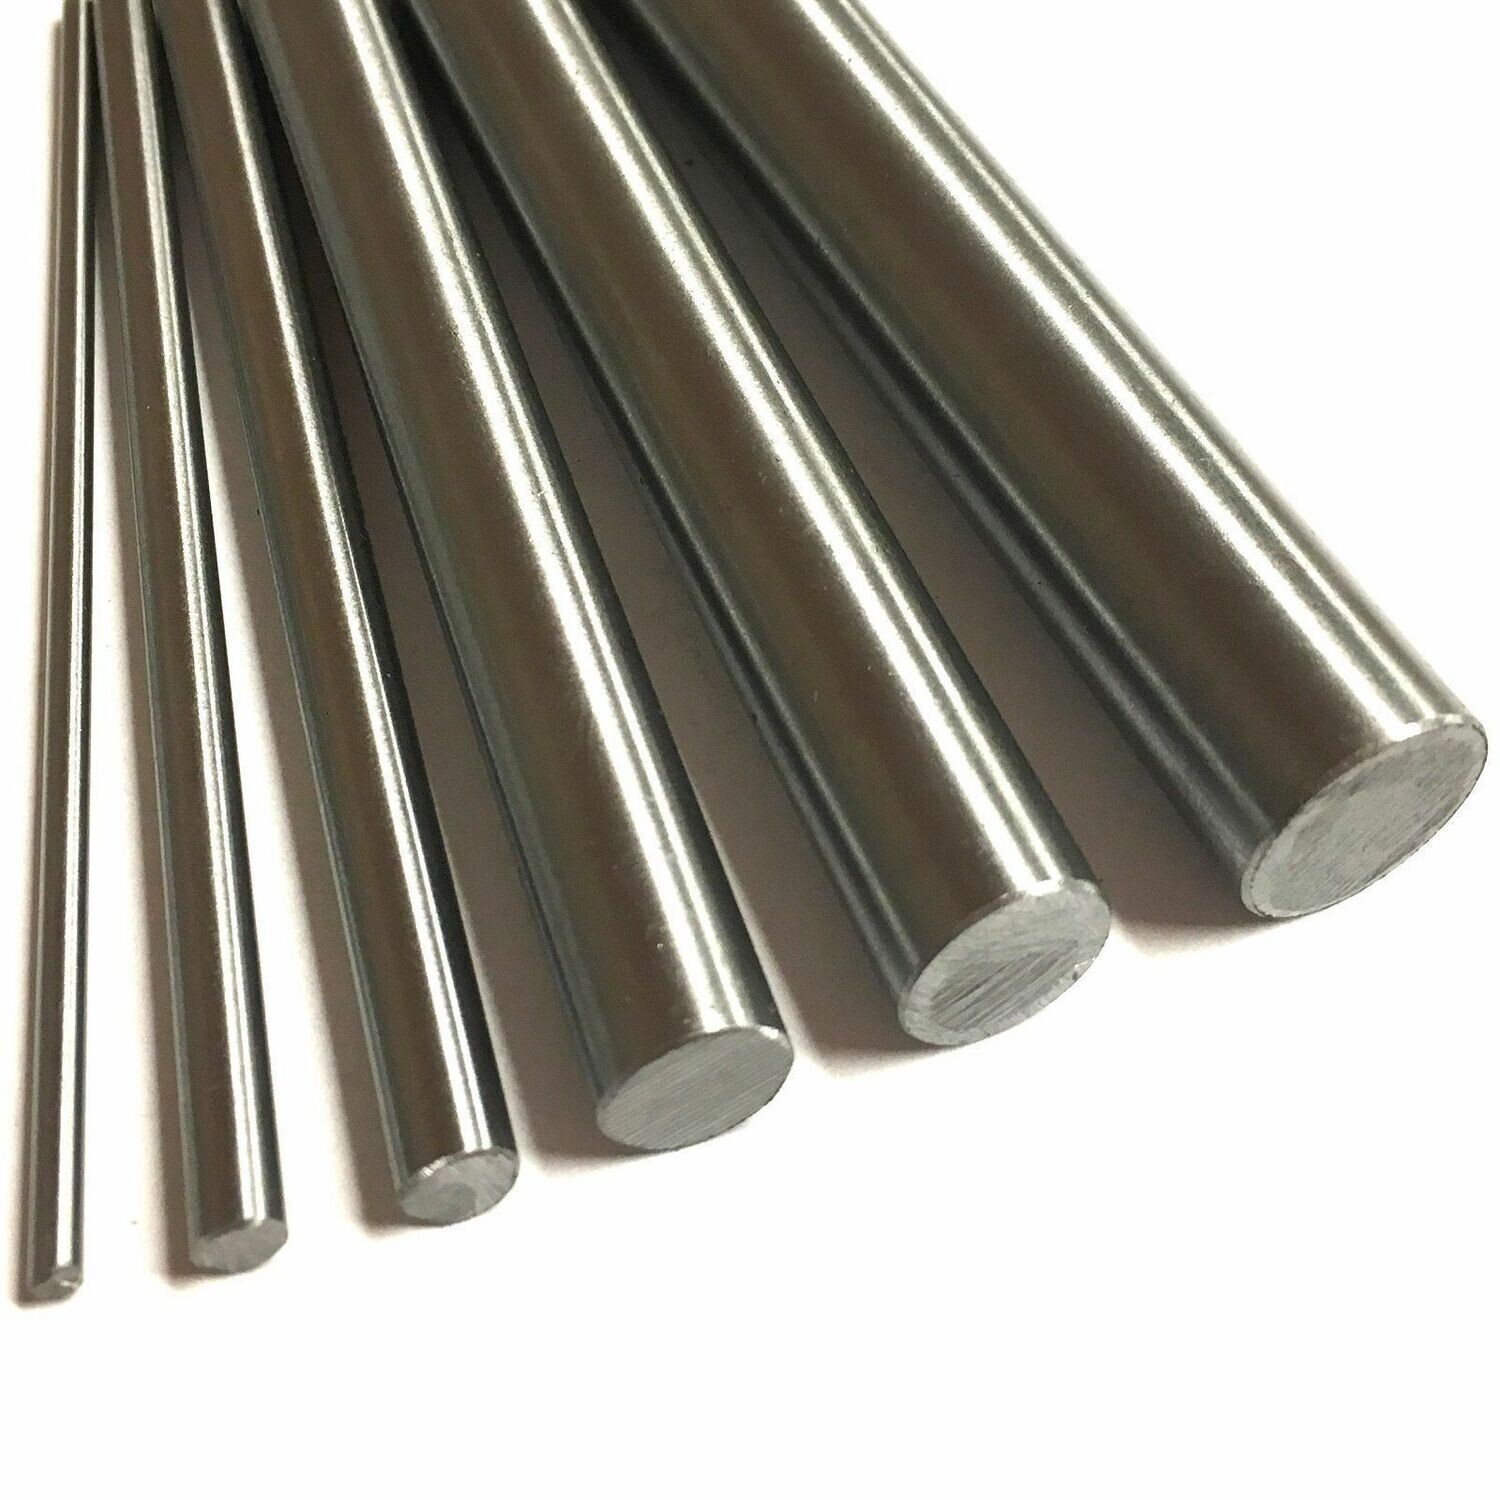 8.0mm x 3000mm A2 304 Stainless Steel Round Bar